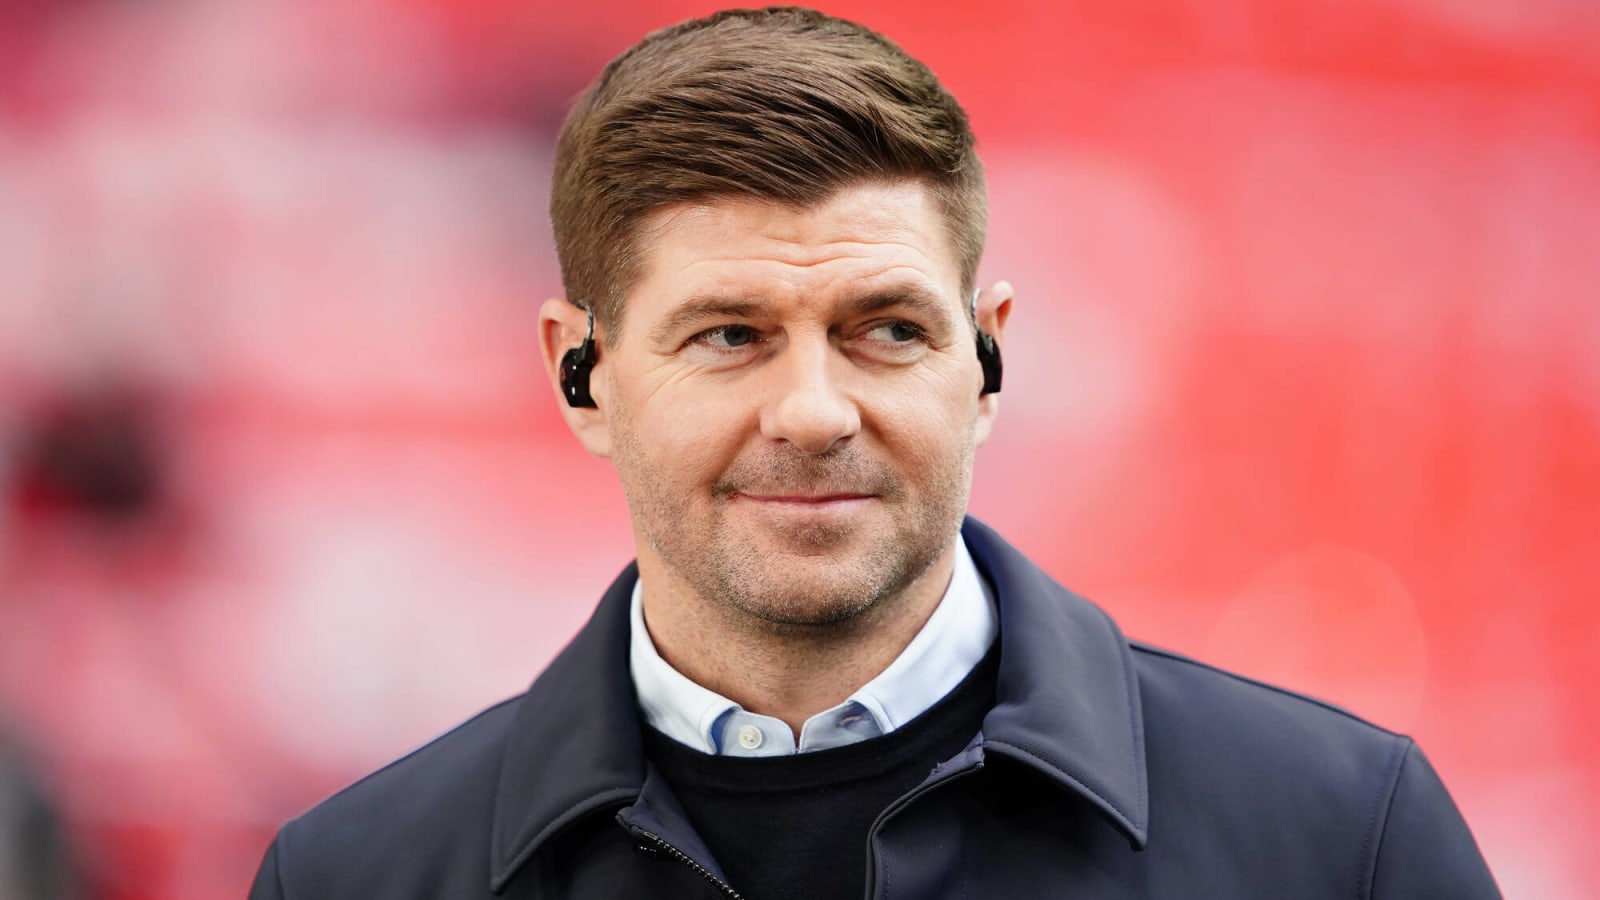 Steven Gerrard could be set to make a massive comeback to management, with one of the biggest jobs in Europe